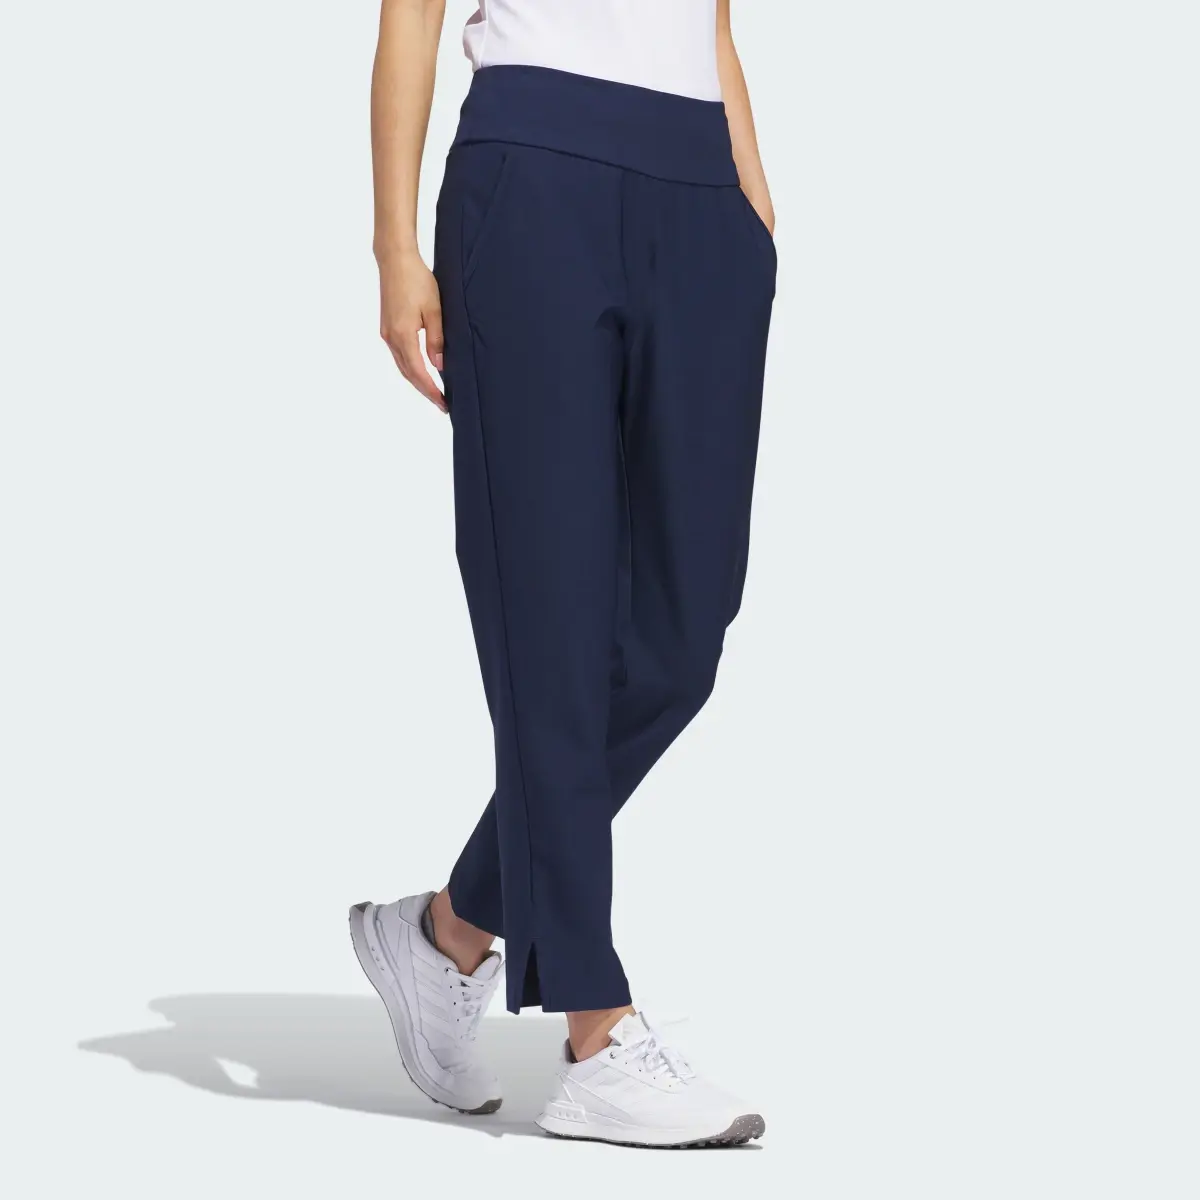 Adidas Ultimate365 Solid Ankle Trousers. 3